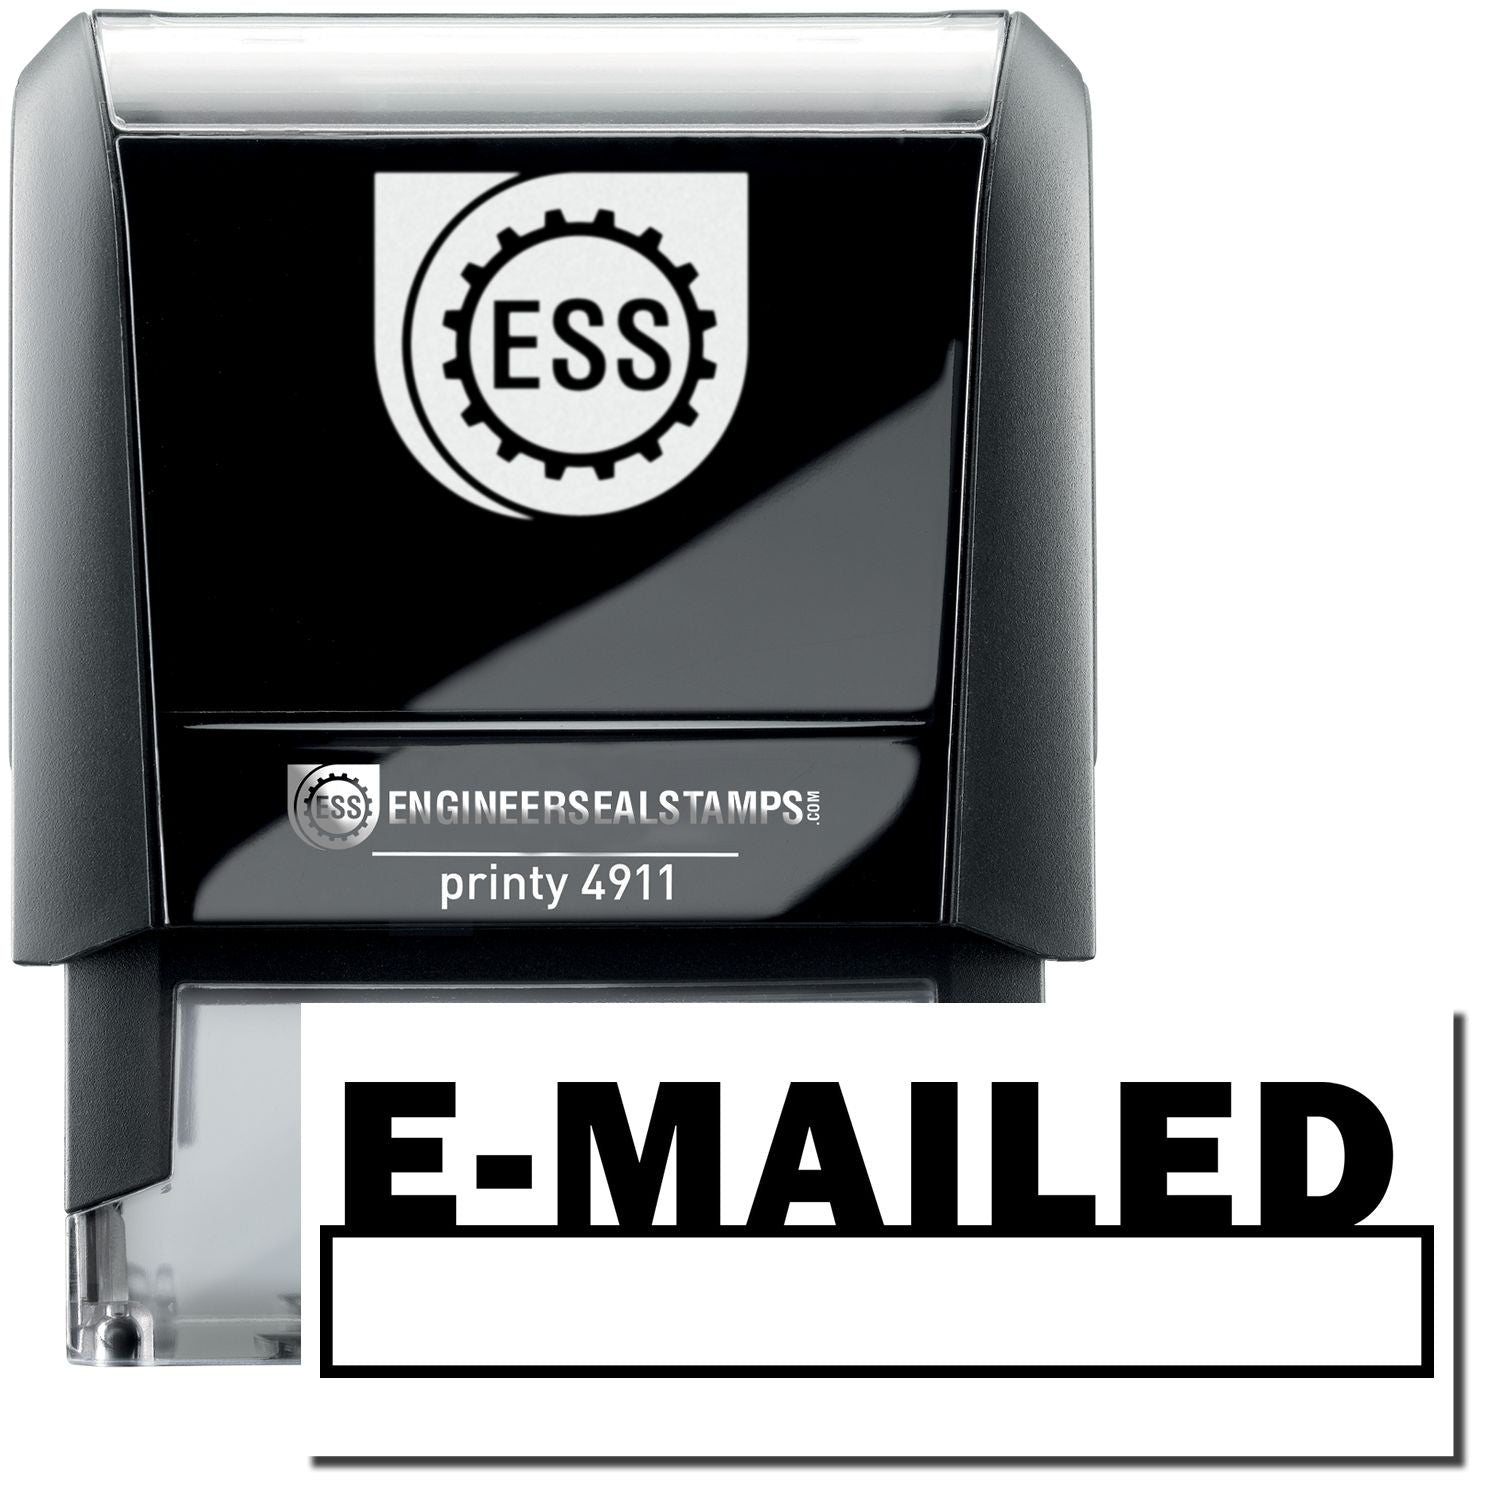 A self-inking stamp with a stamped image showing how the text "E-MAILED" with a date box under it is displayed after stamping.